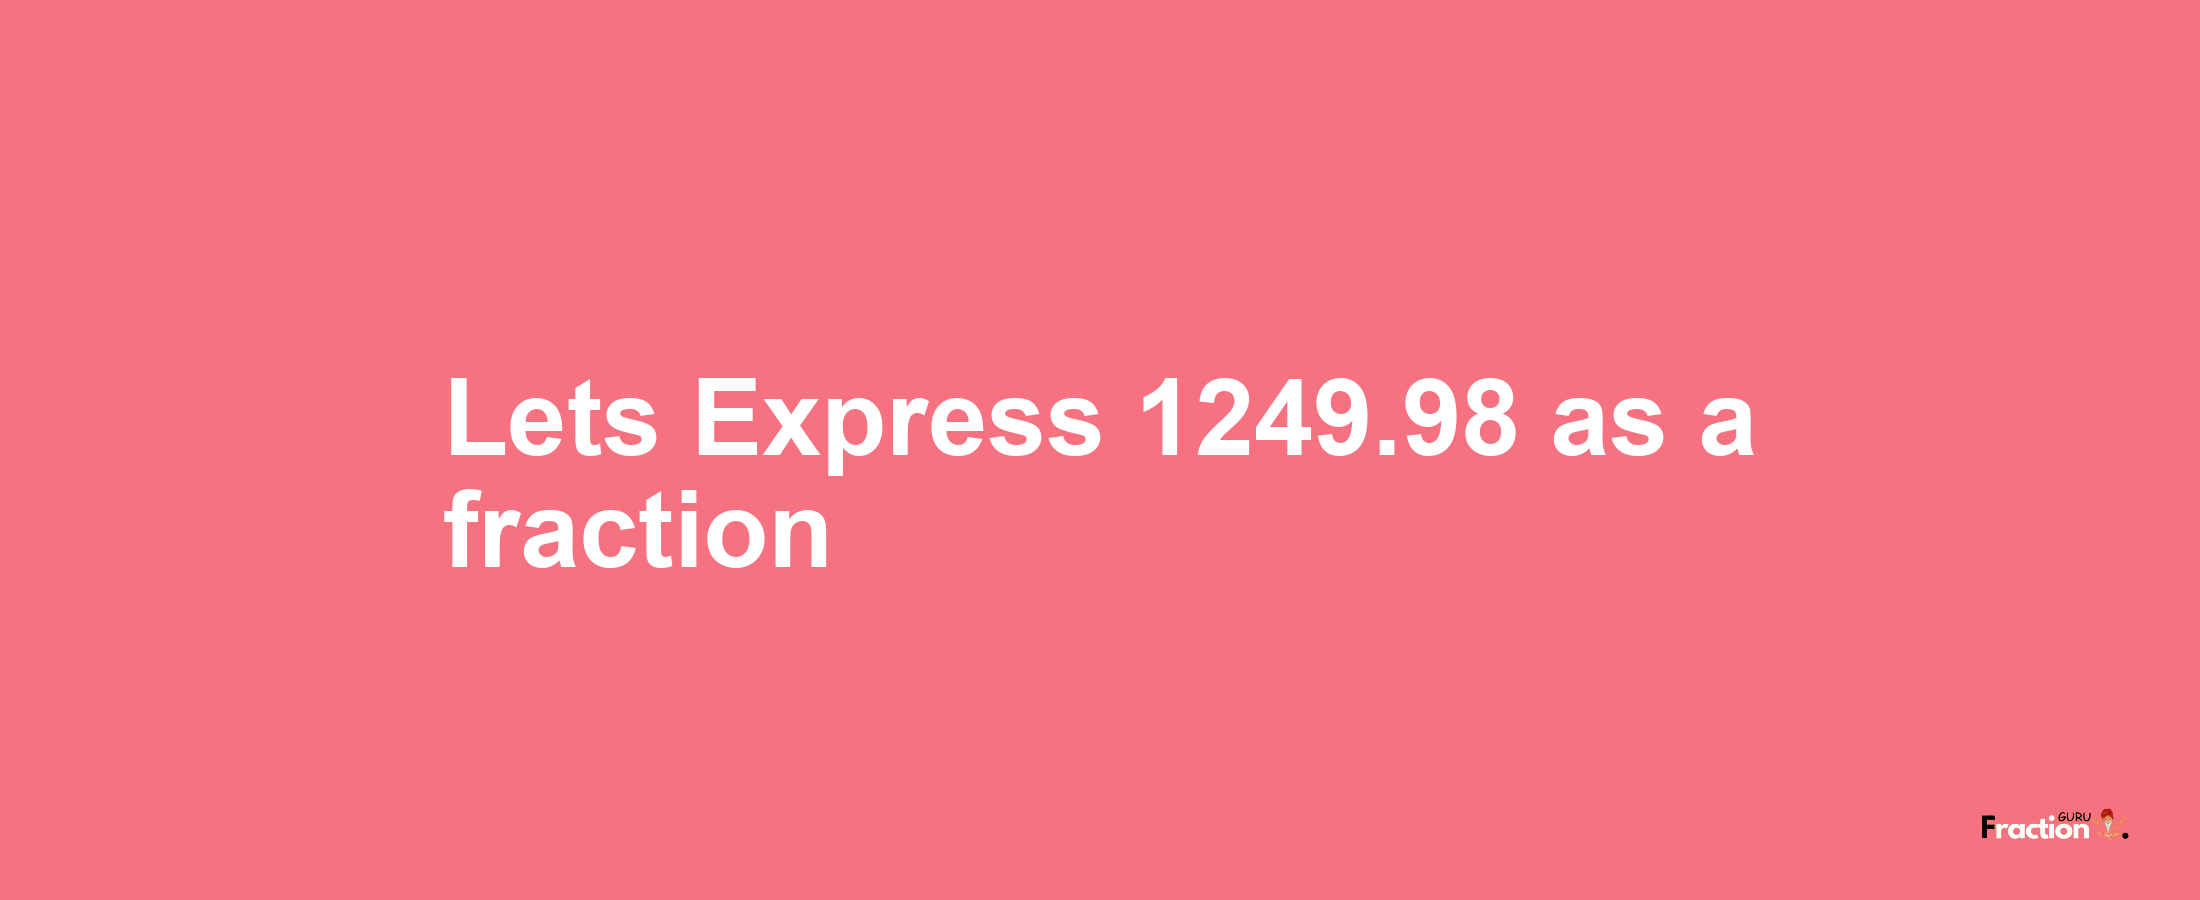 Lets Express 1249.98 as afraction